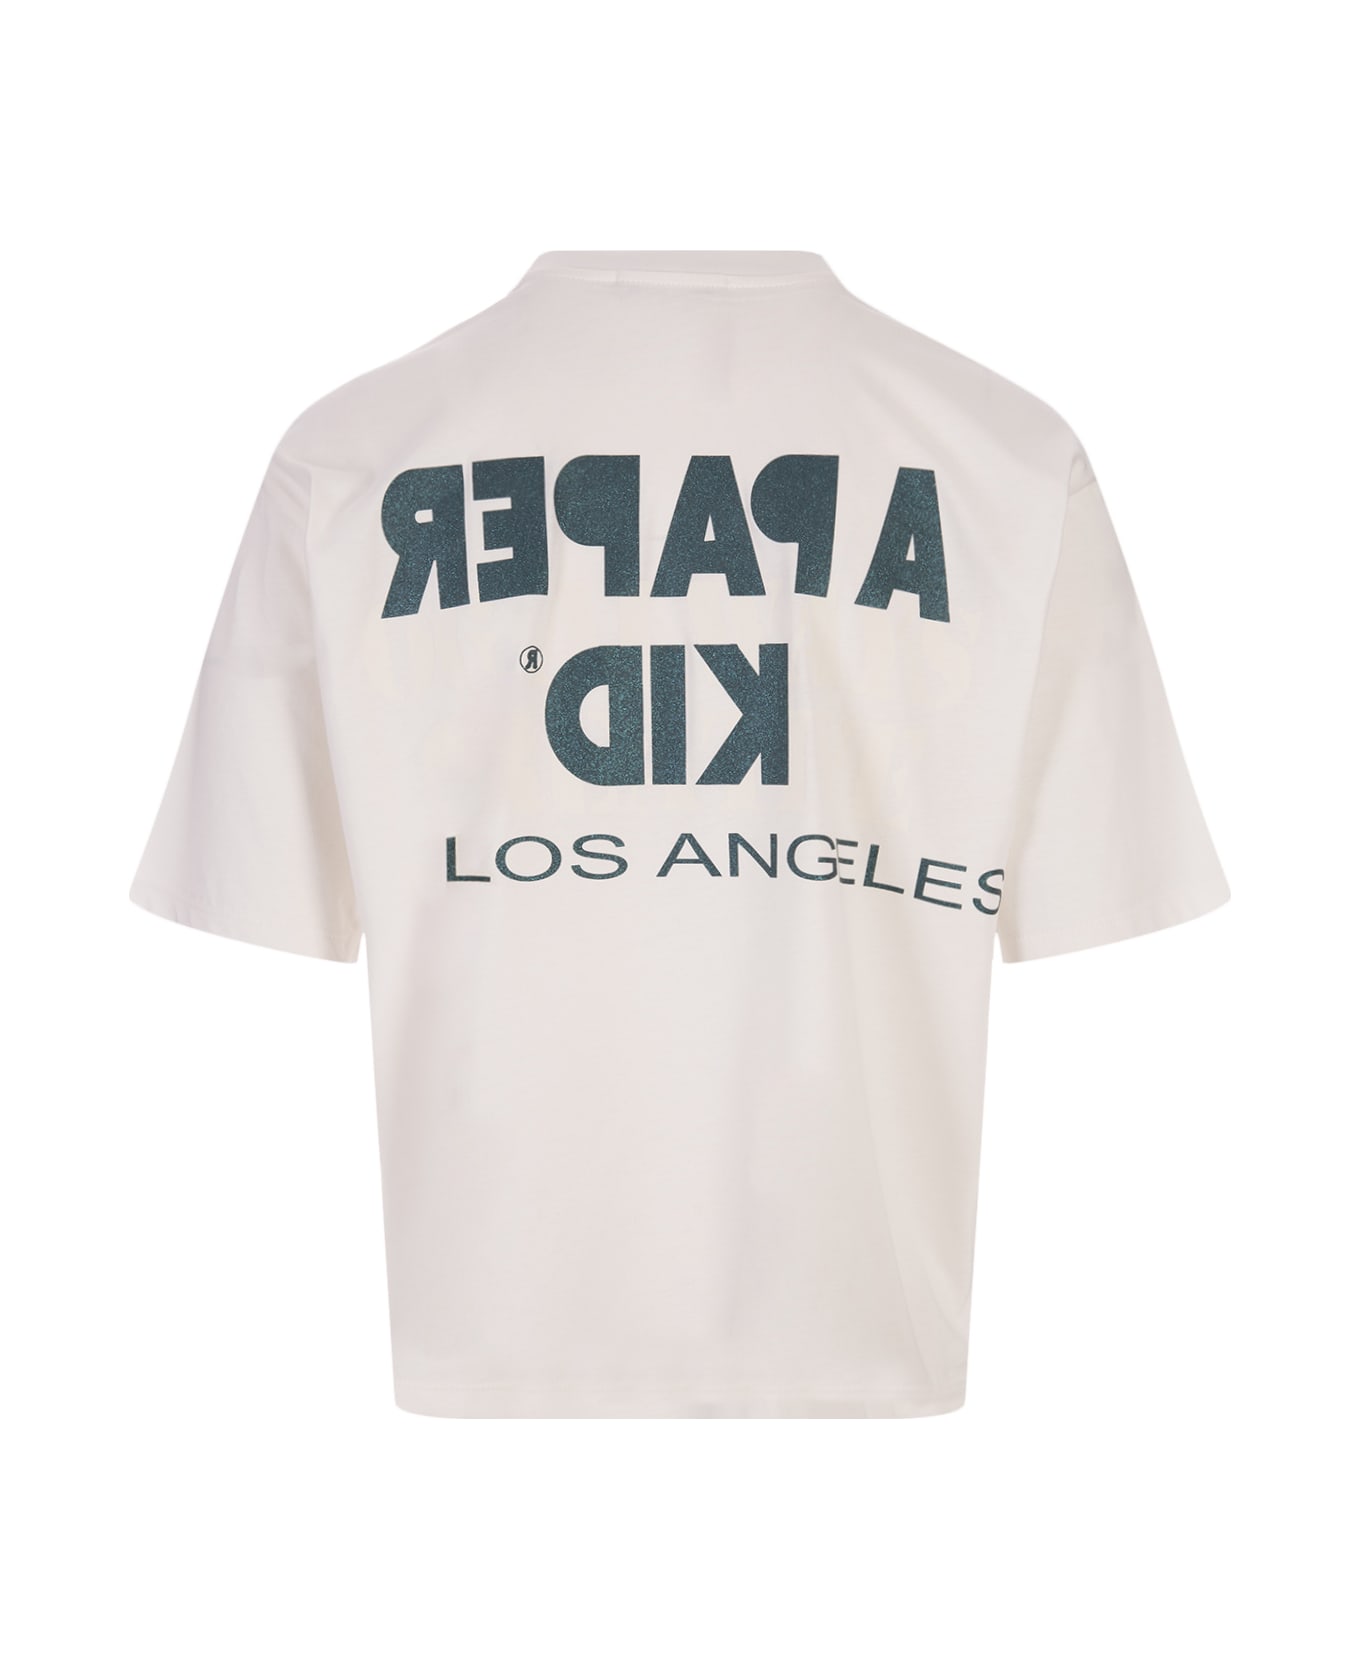 A Paper Kid Los Angeles T-shirt In White